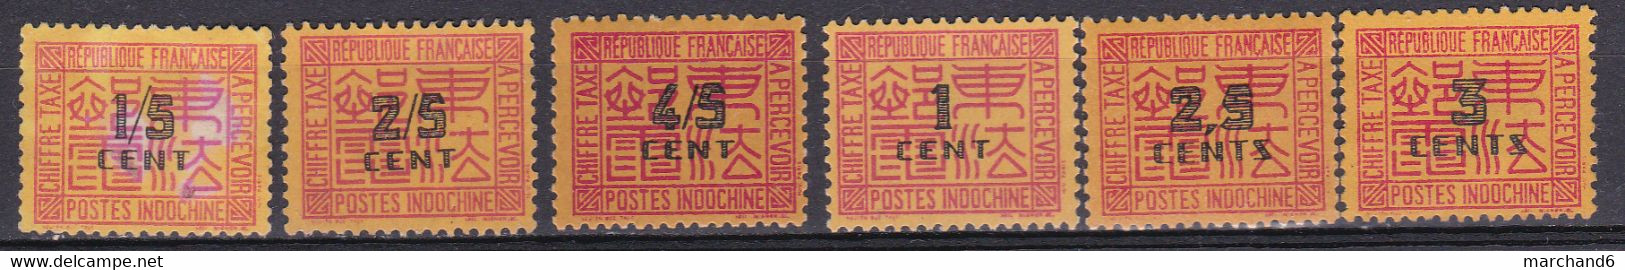 Indochine Timbre Taxe 1931-41 N°58-67-74+57-58-59-60-62-63 Oblitéré Neuf** Neuf* Sans Gomme 2scan - Timbres-taxe